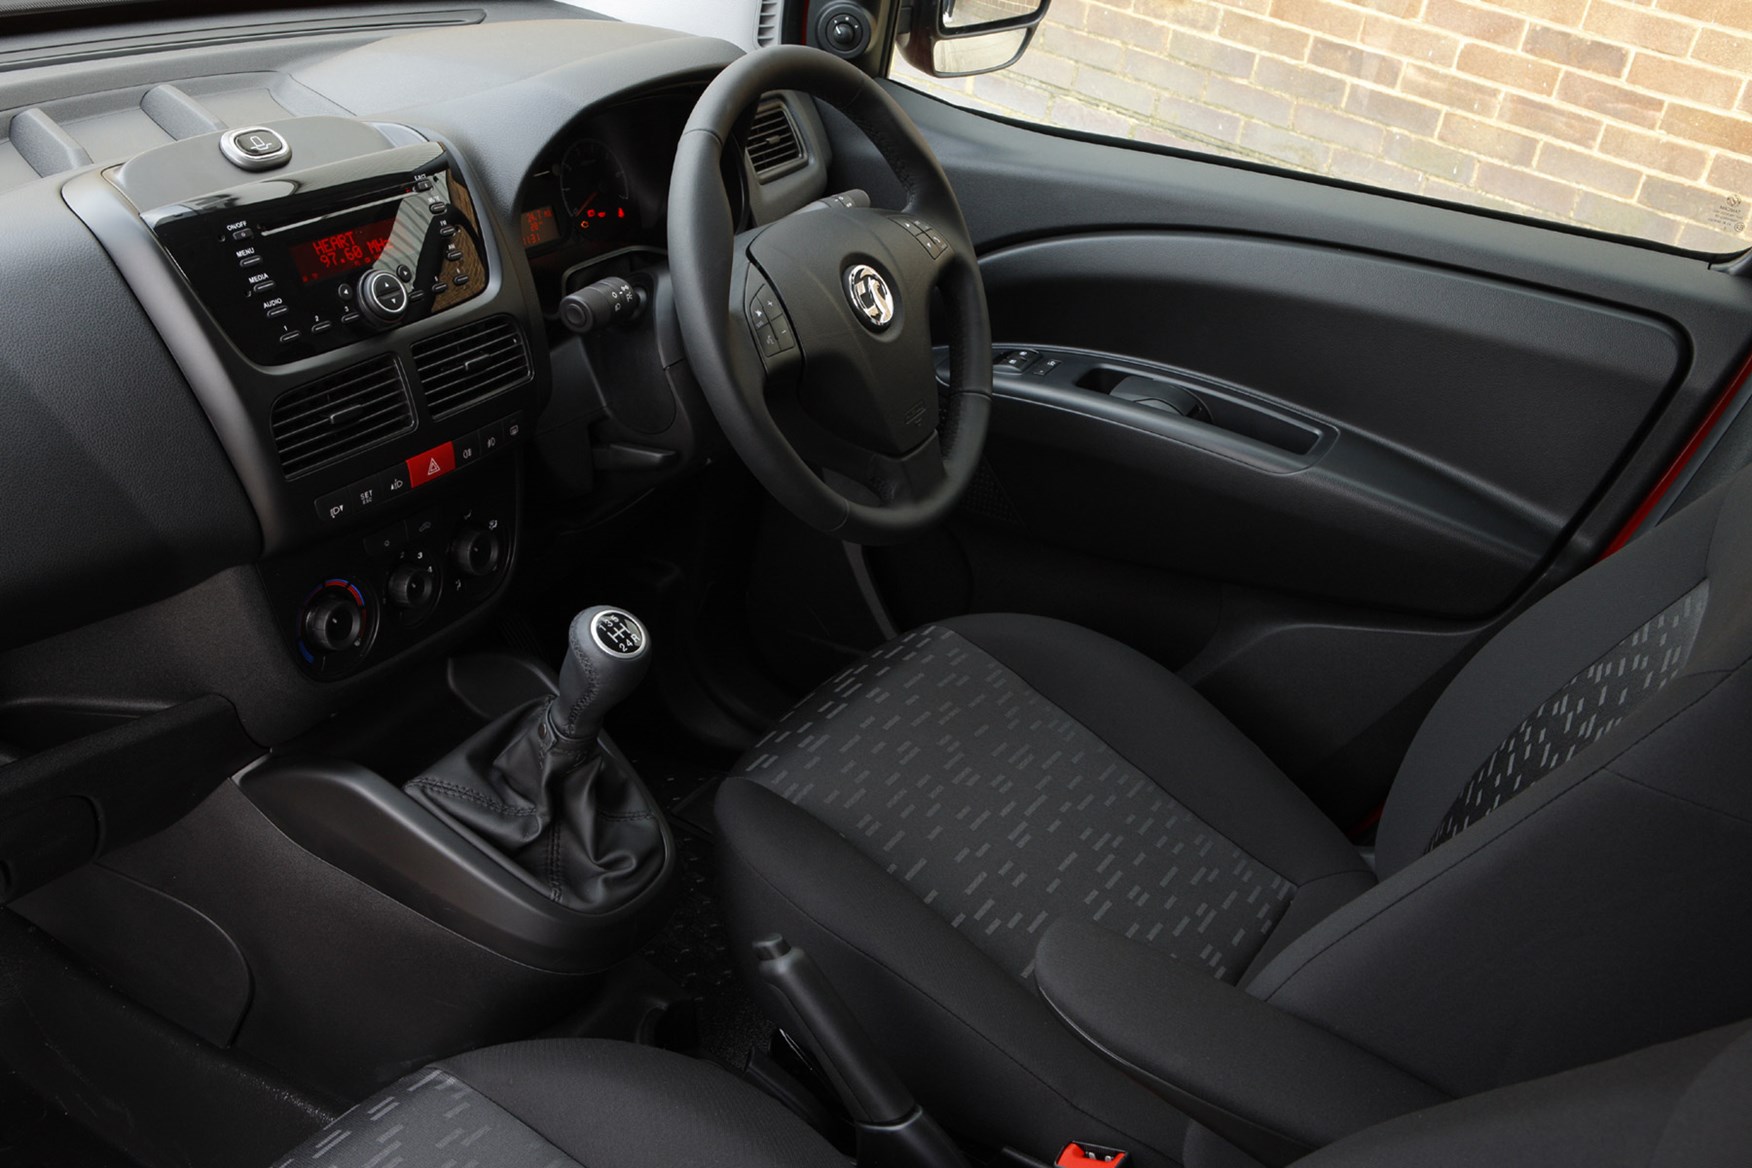 Vauxhall Combo full review on Parkers Vans - cabin interior